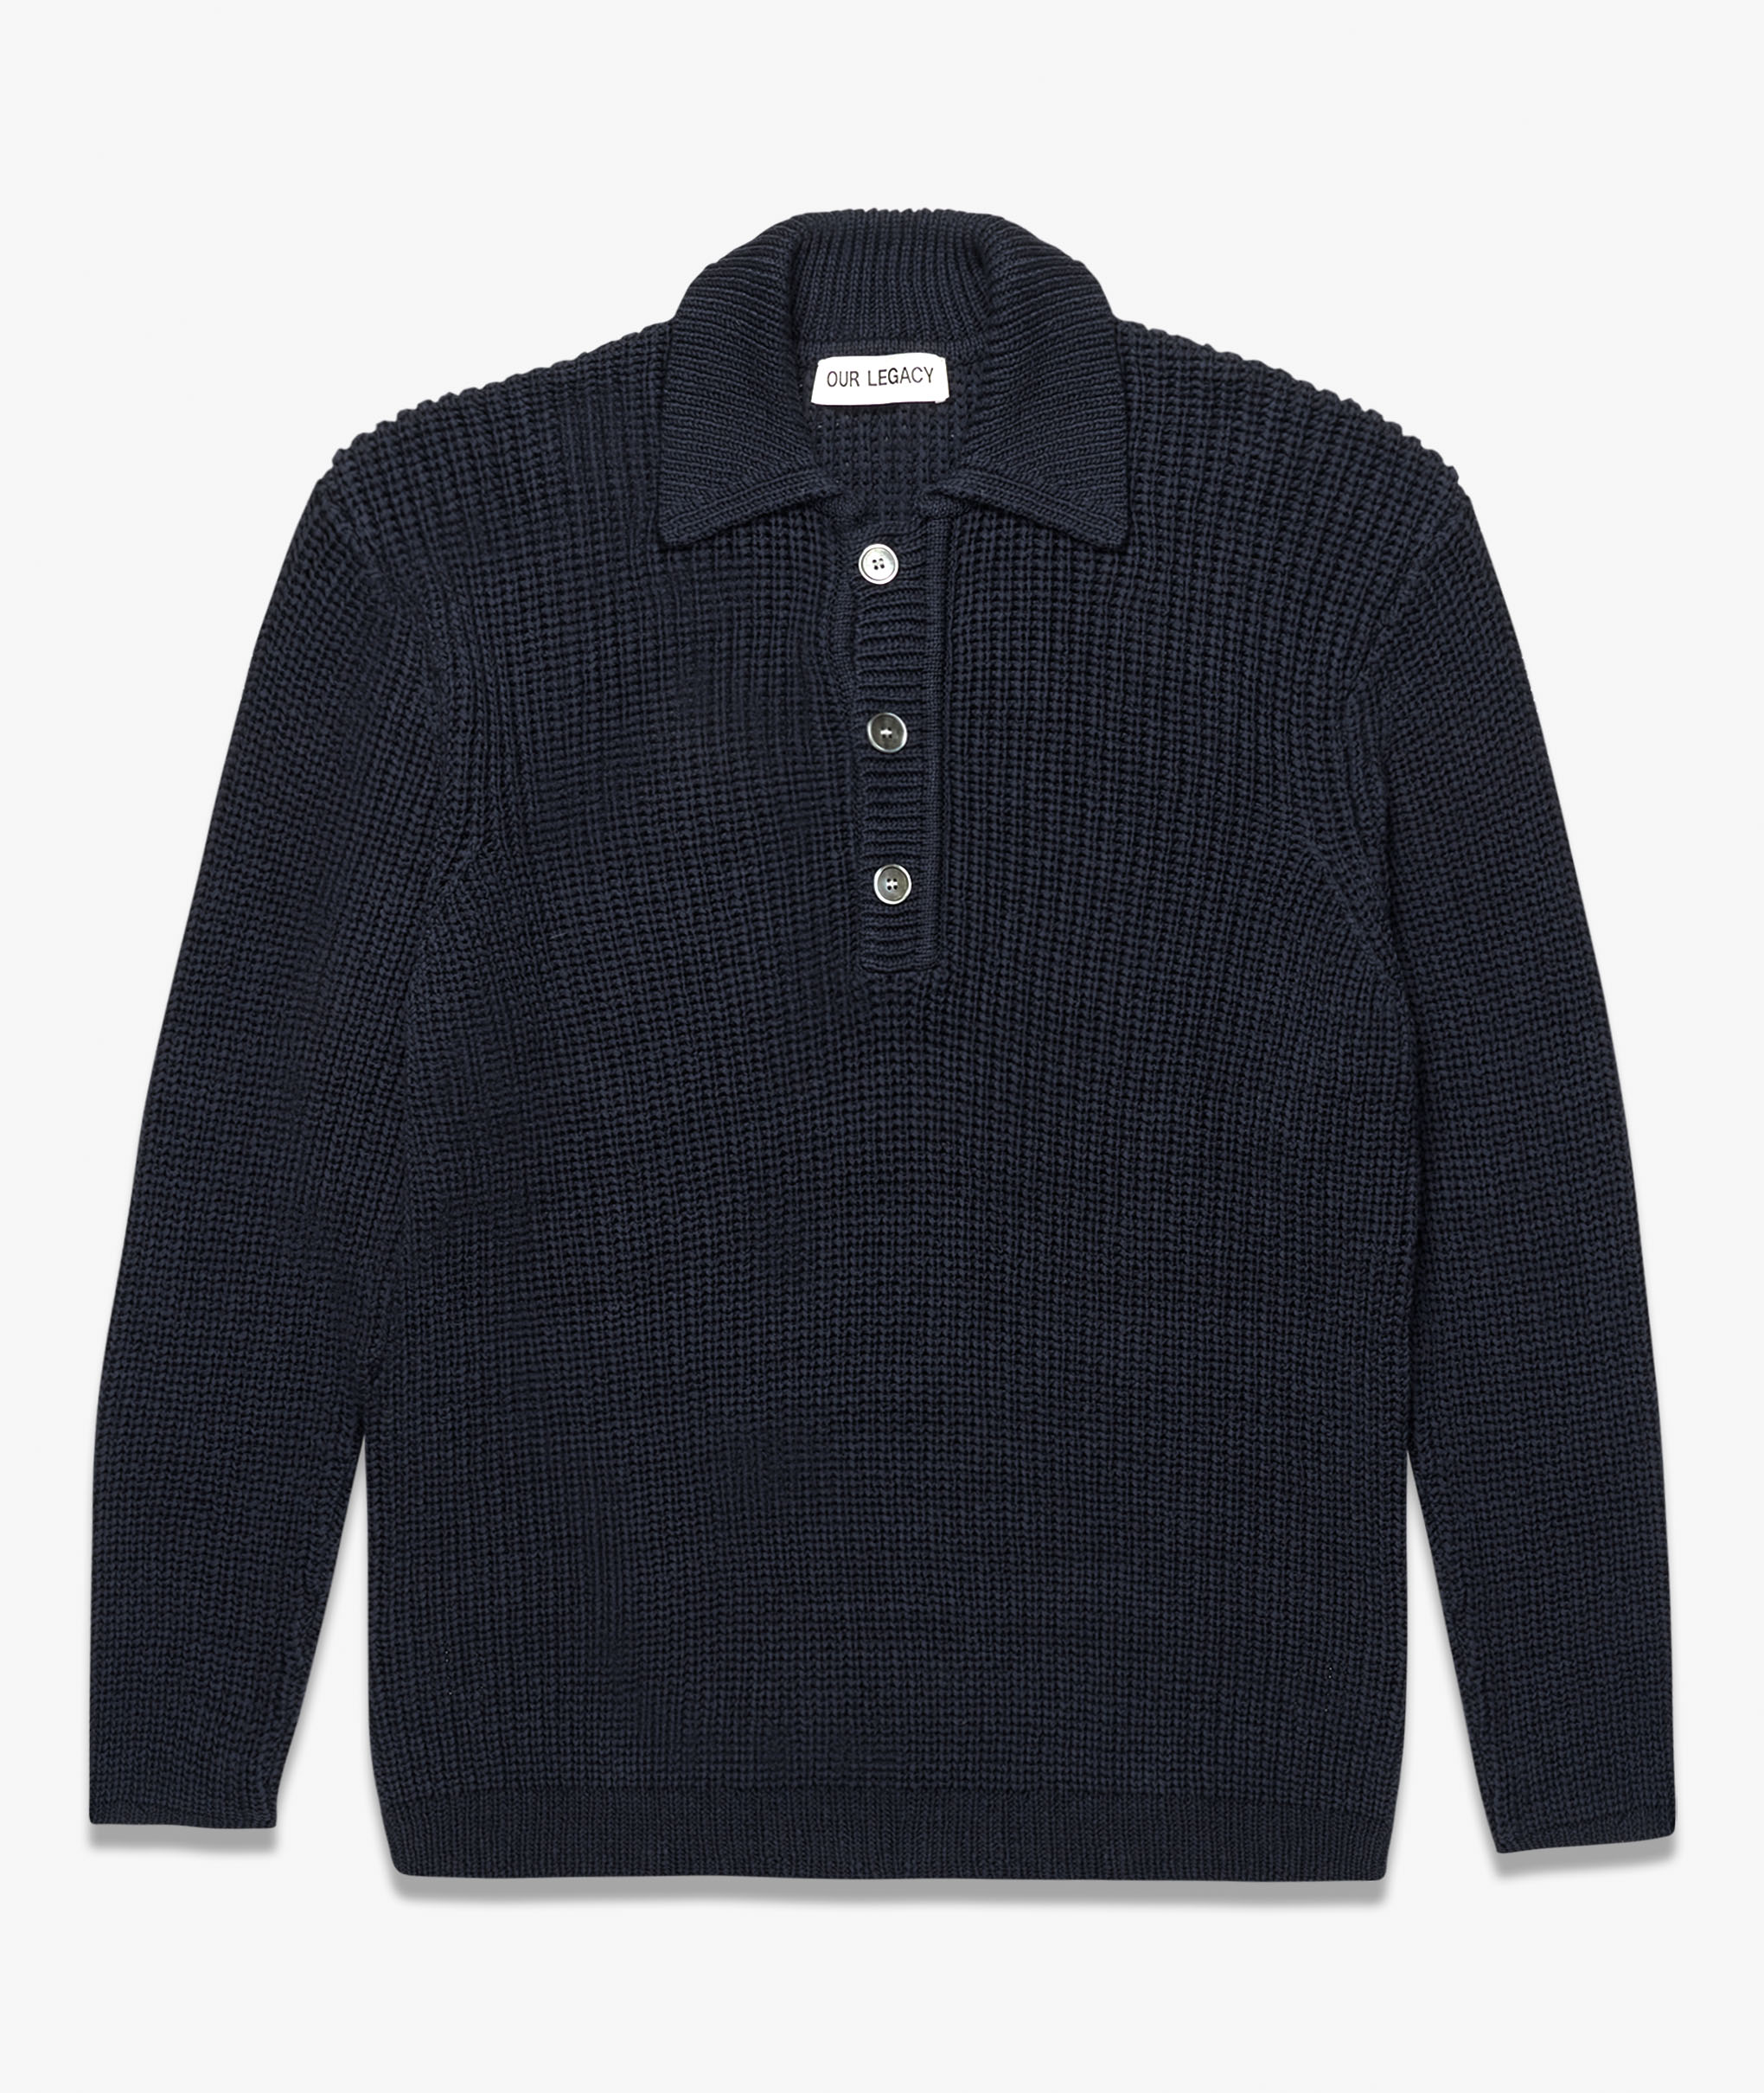 Norse Store | Shipping Worldwide - Our Legacy BIG PIQUET - Navy